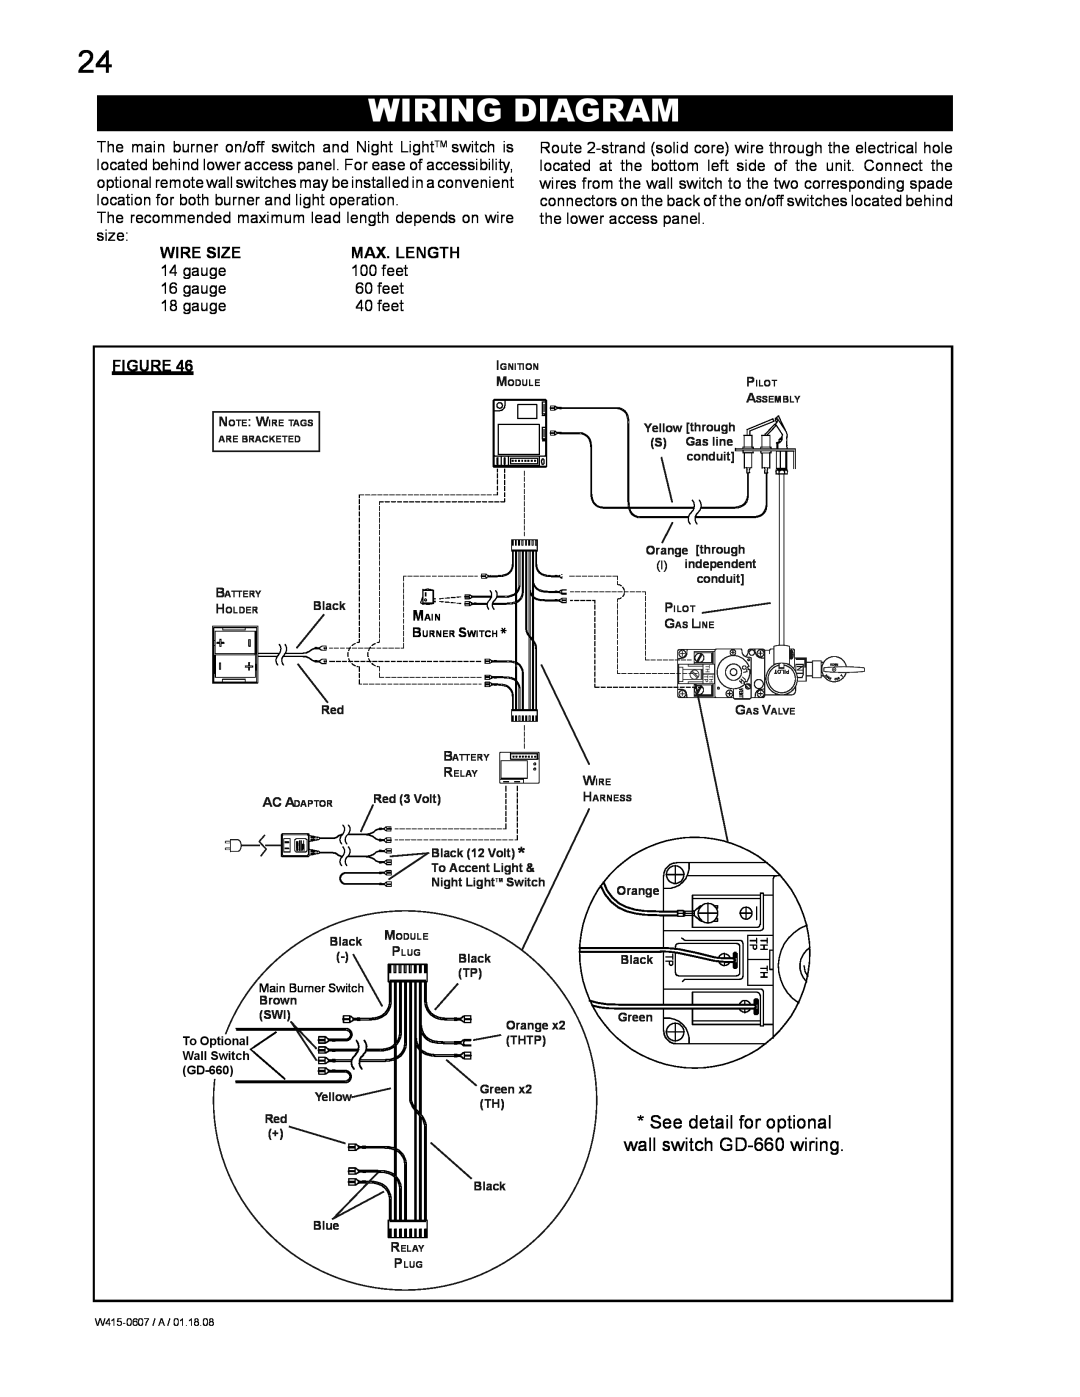 Napoleon Fireplaces GDS26P, GDS26N manual Wiring Diagram, See detail for optional wall switch GD-660wiring 